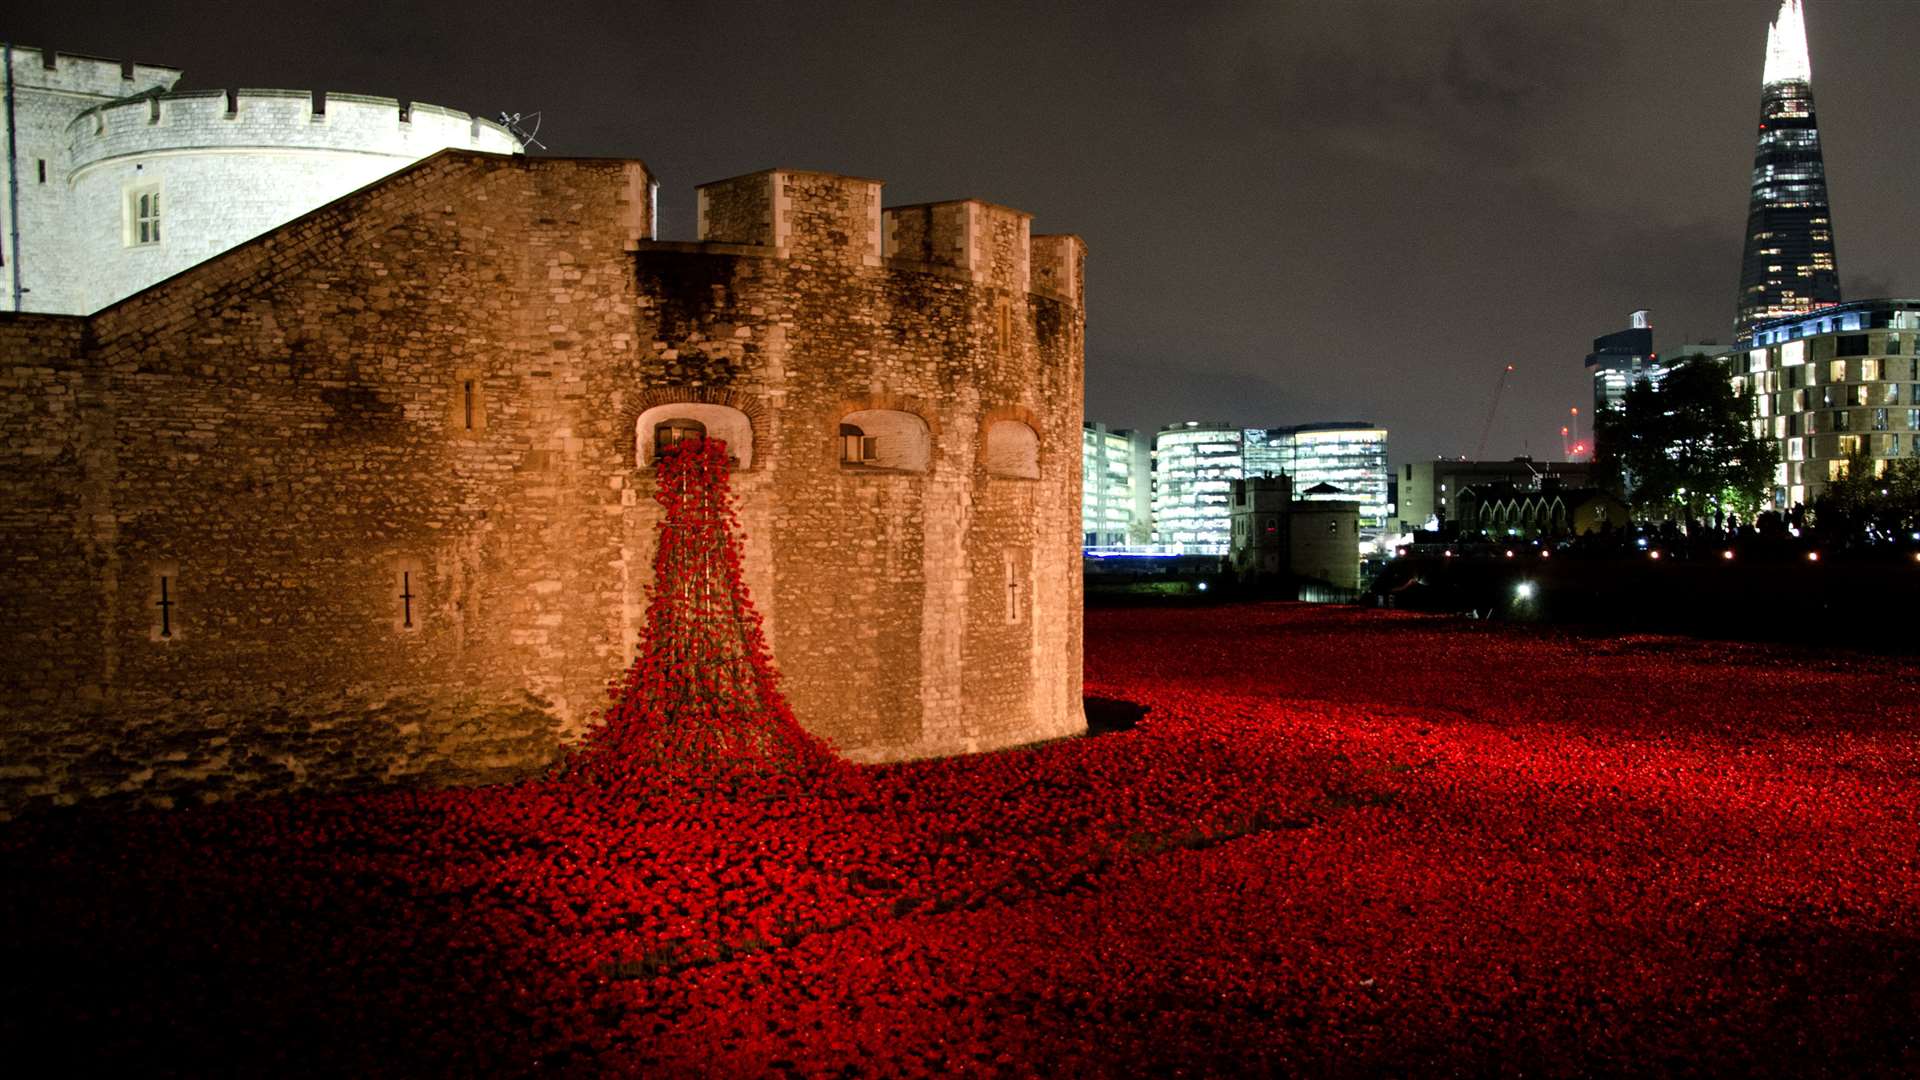 The brilliant poppy display at the Tower of London